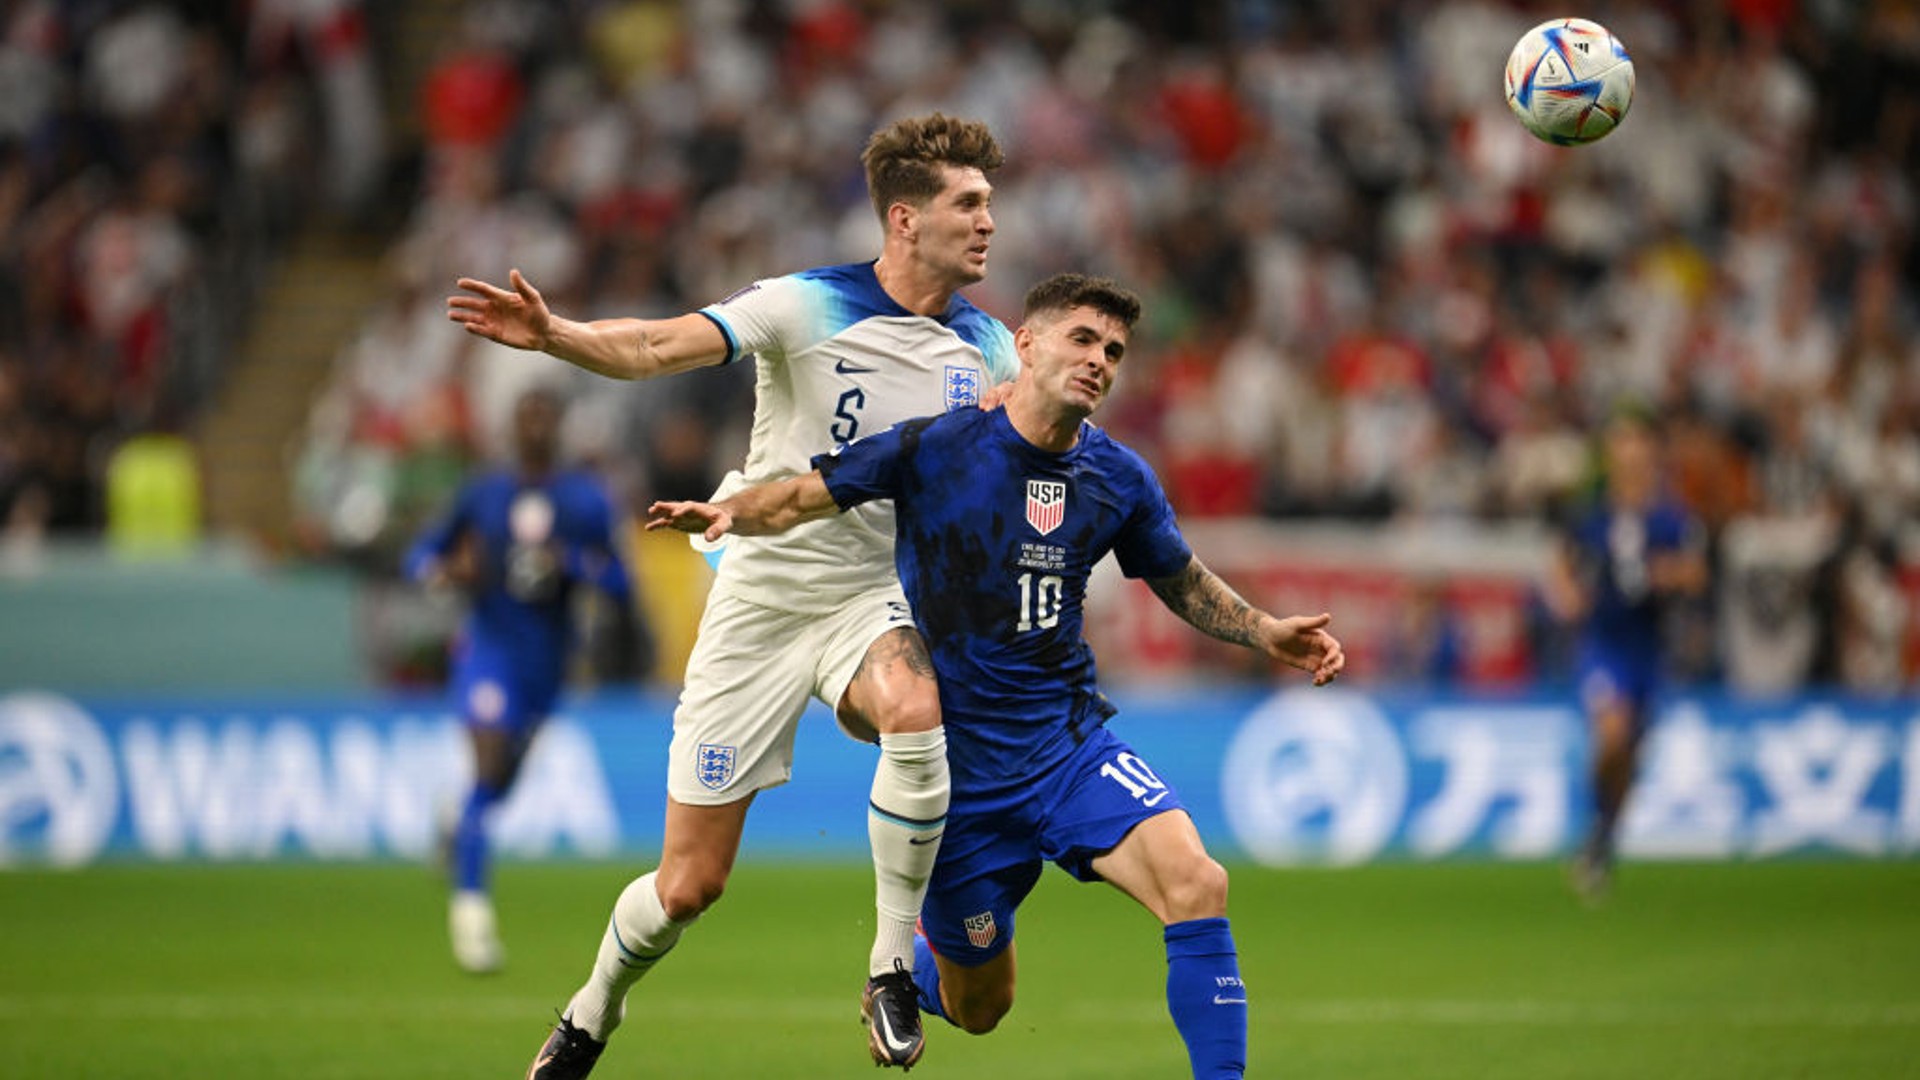 WATCHING BRIEF: John Stones in the thick of the action